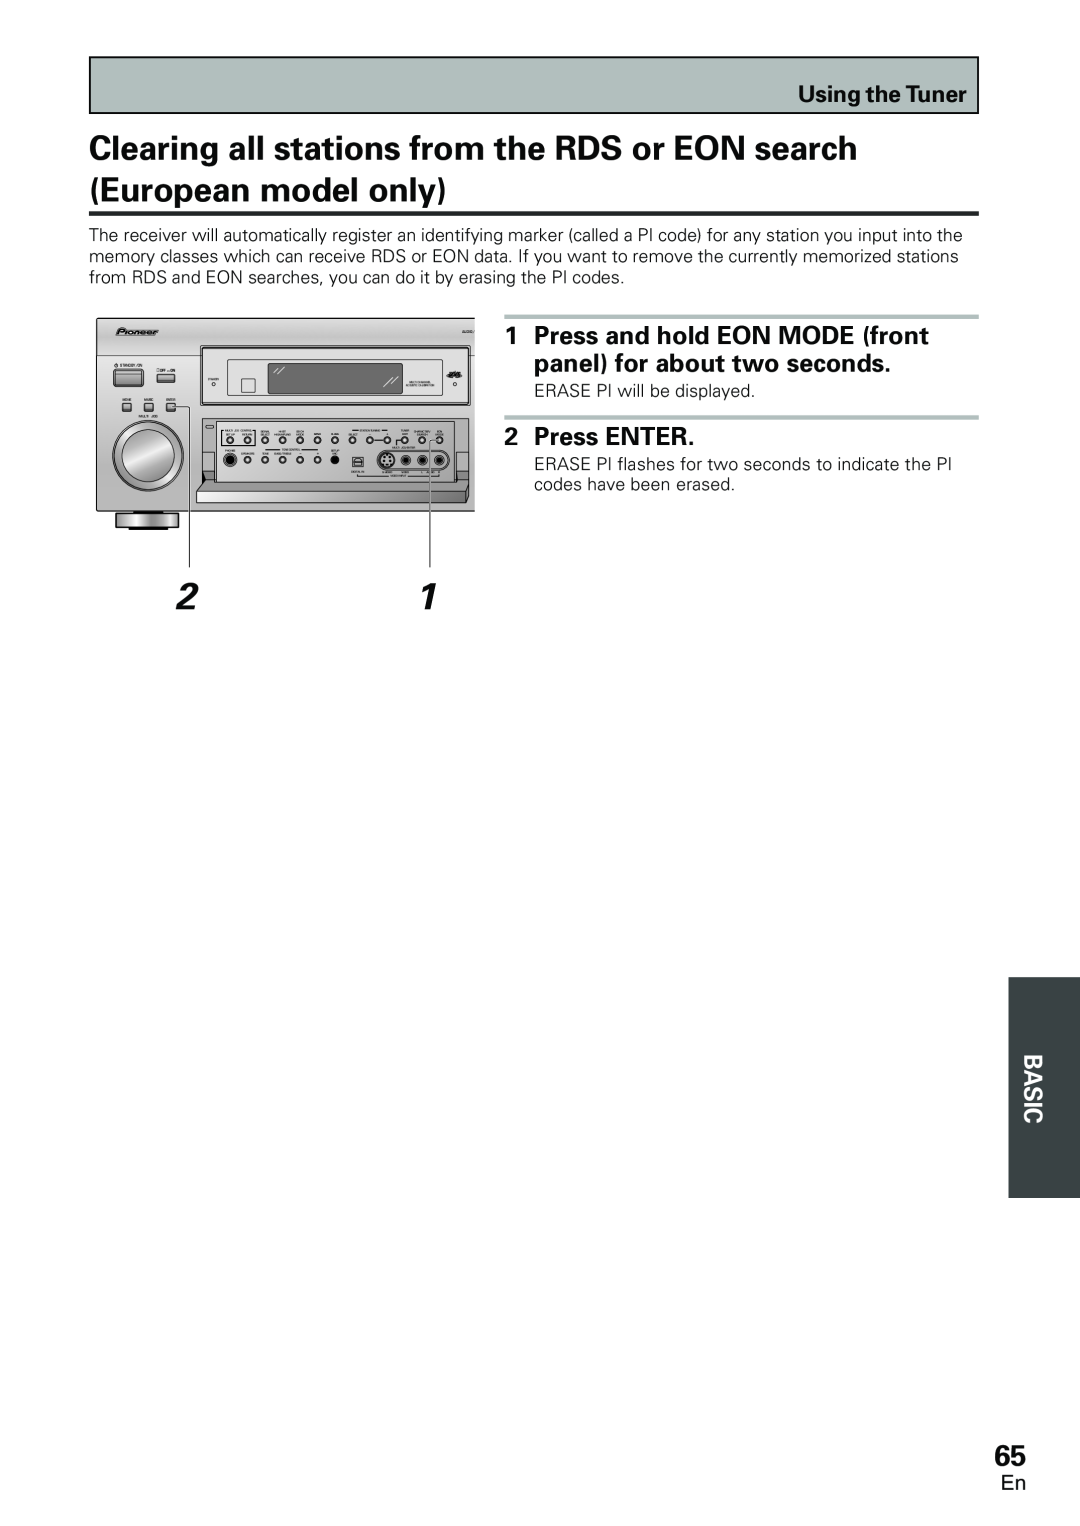 Pioneer VSX-D2011-S, VSX-D2011-G manual Press and hold EON MODE front, panel for about two seconds, Press ENTER, Basic 